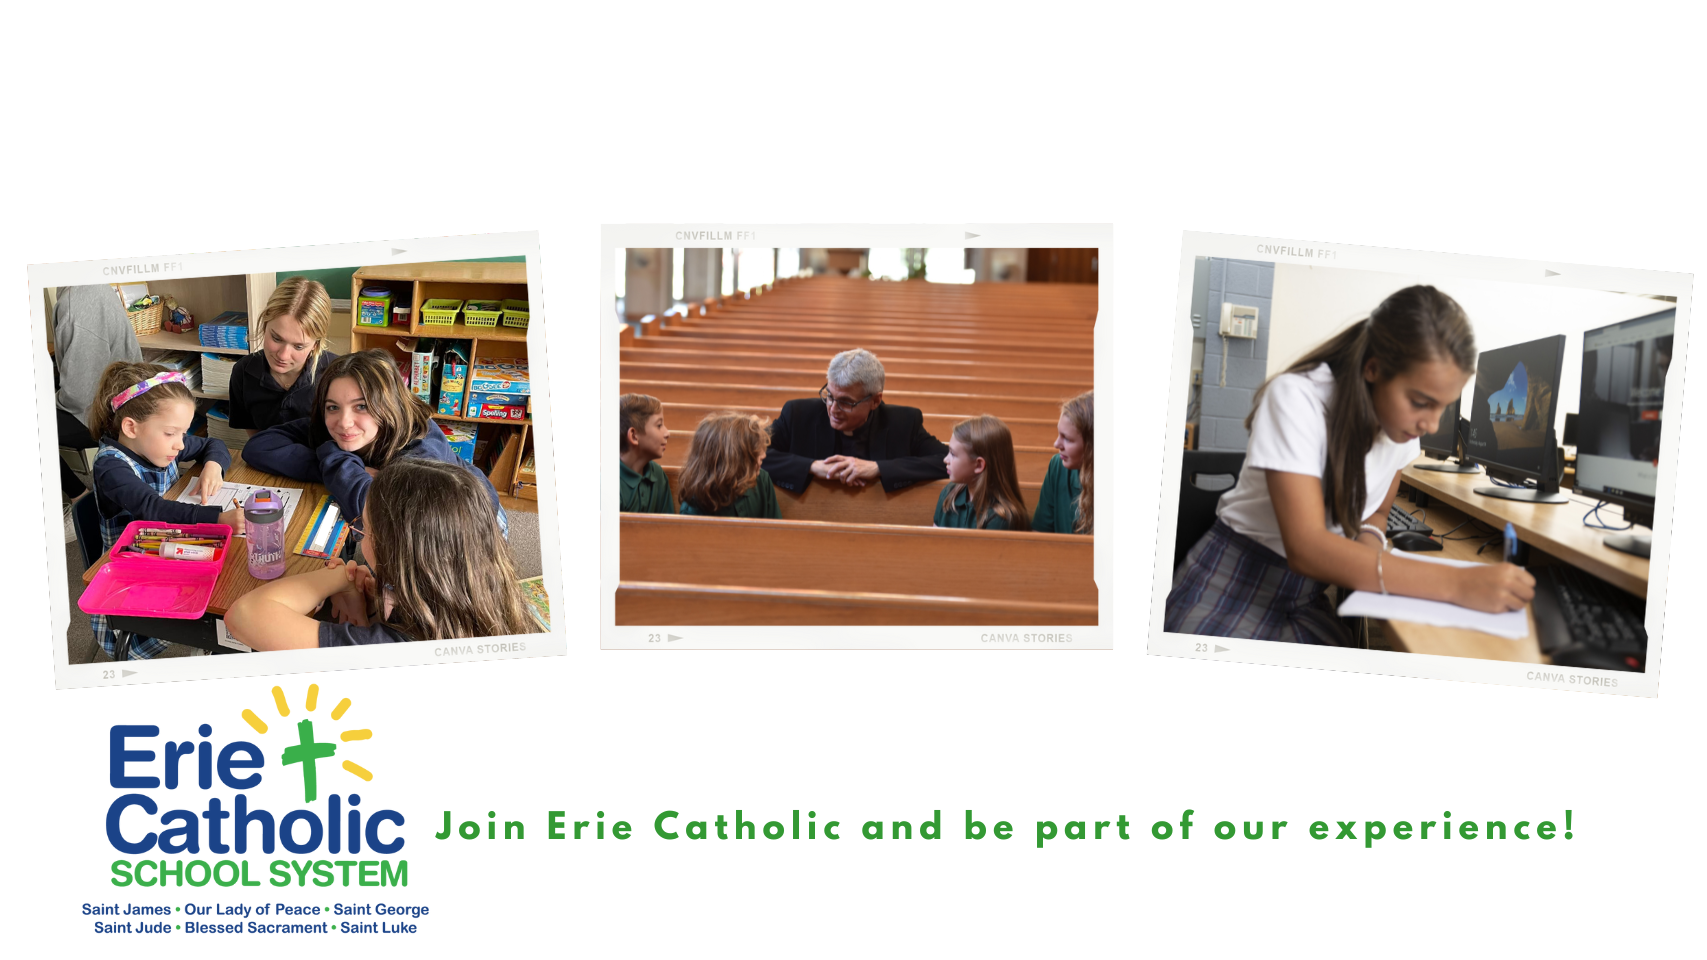 A poster for erie catholic school system shows three pictures